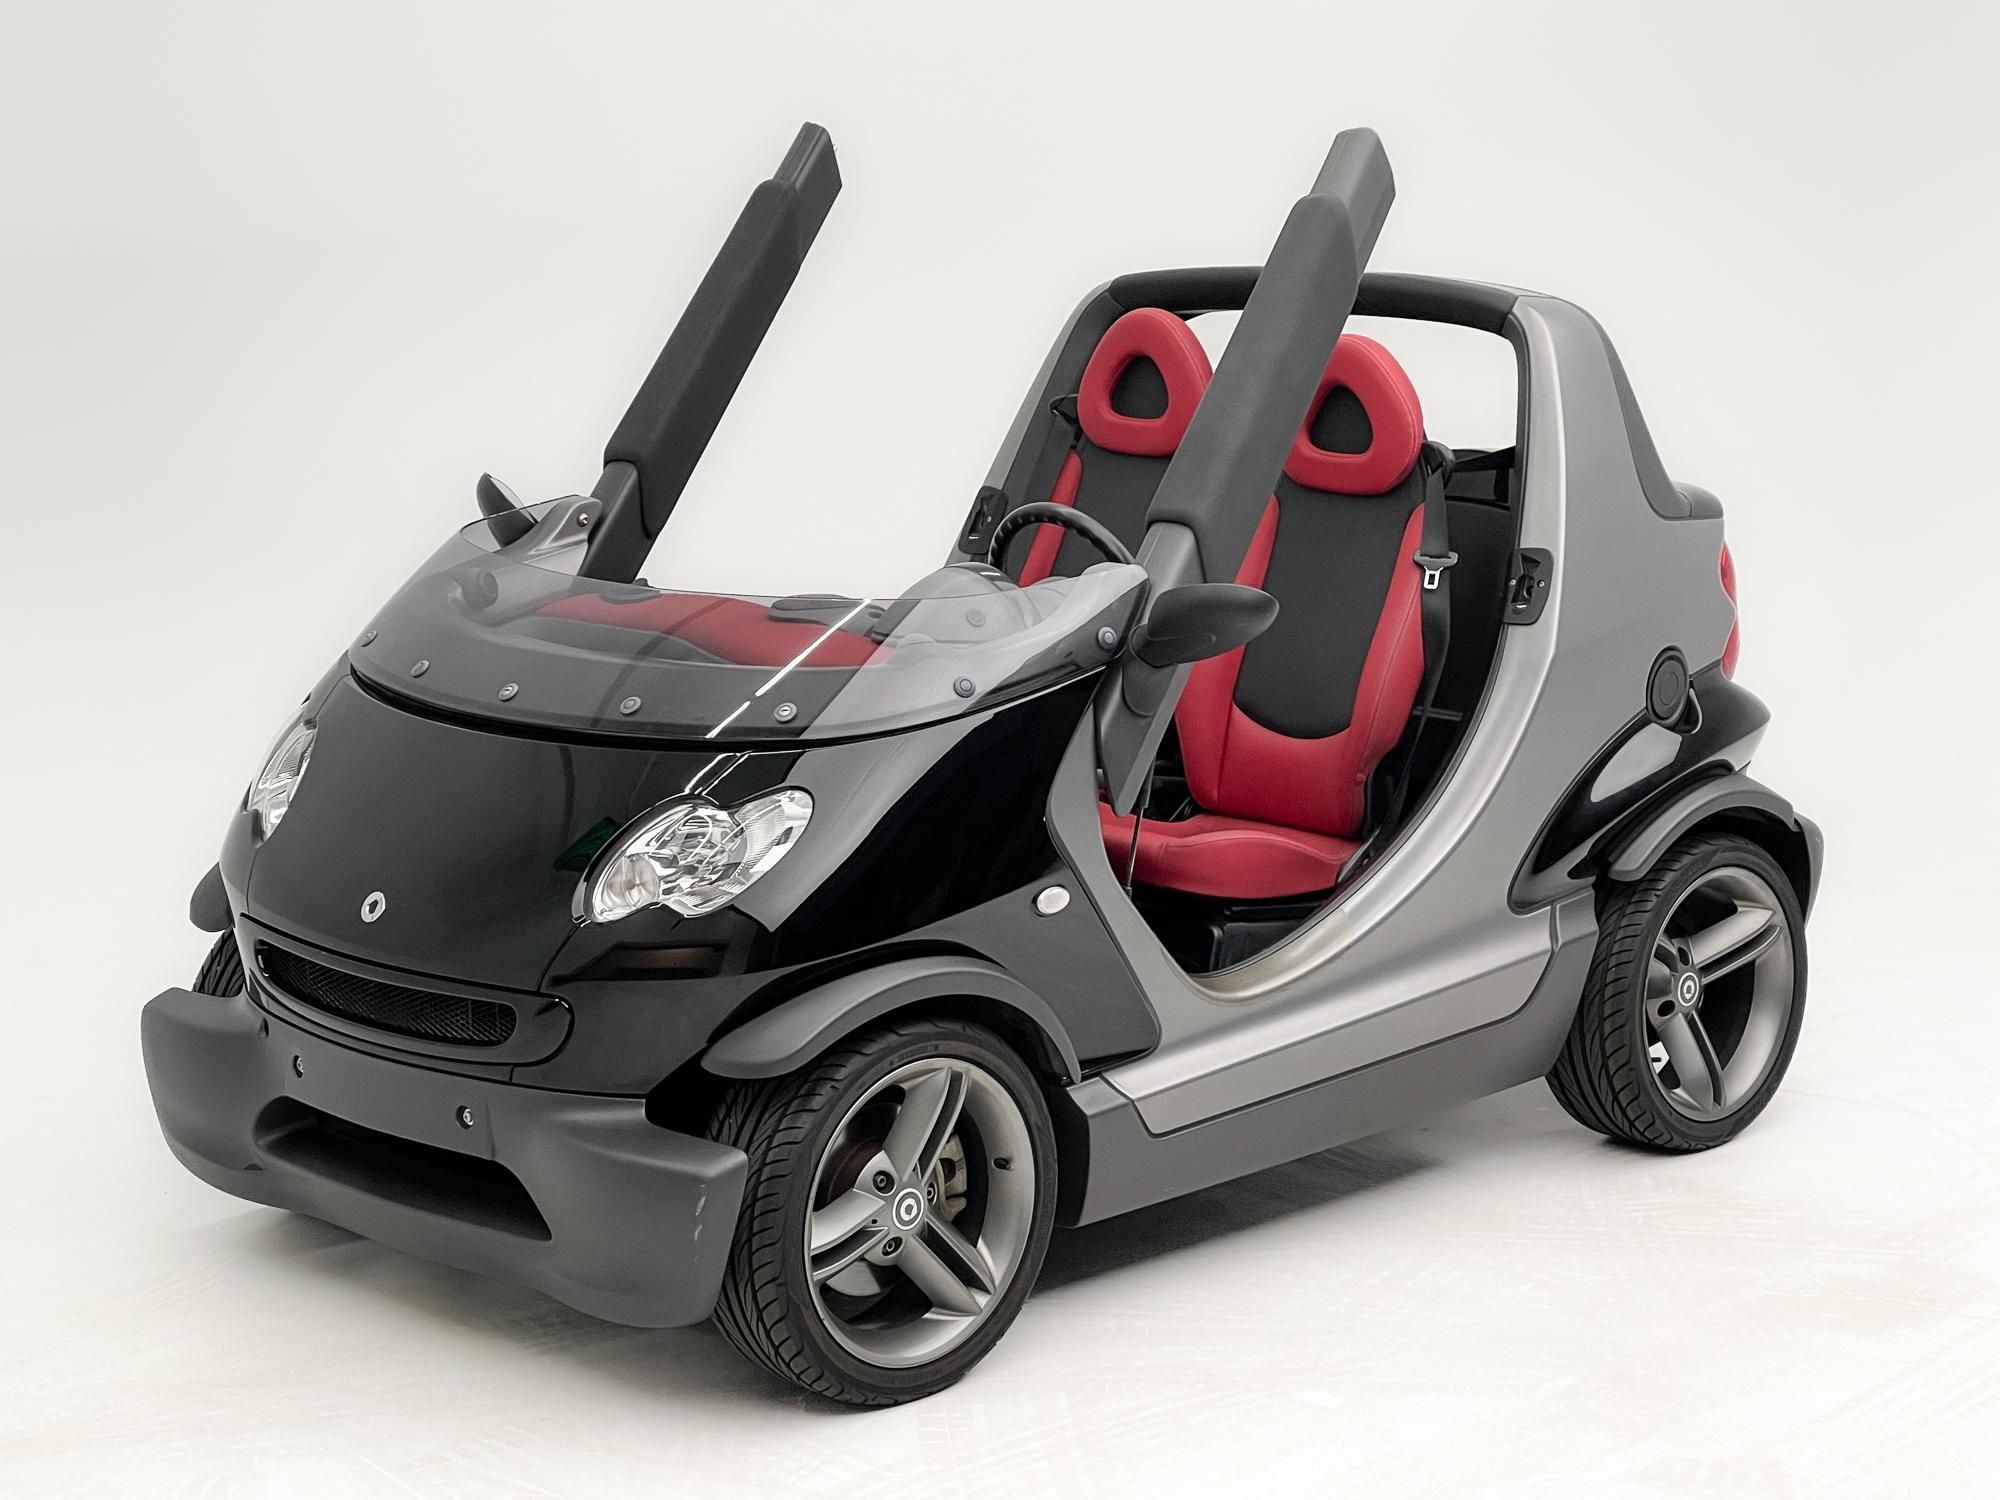 The Smart Crossblade Is a Quirky, Rare, Road-Legal Concept Car